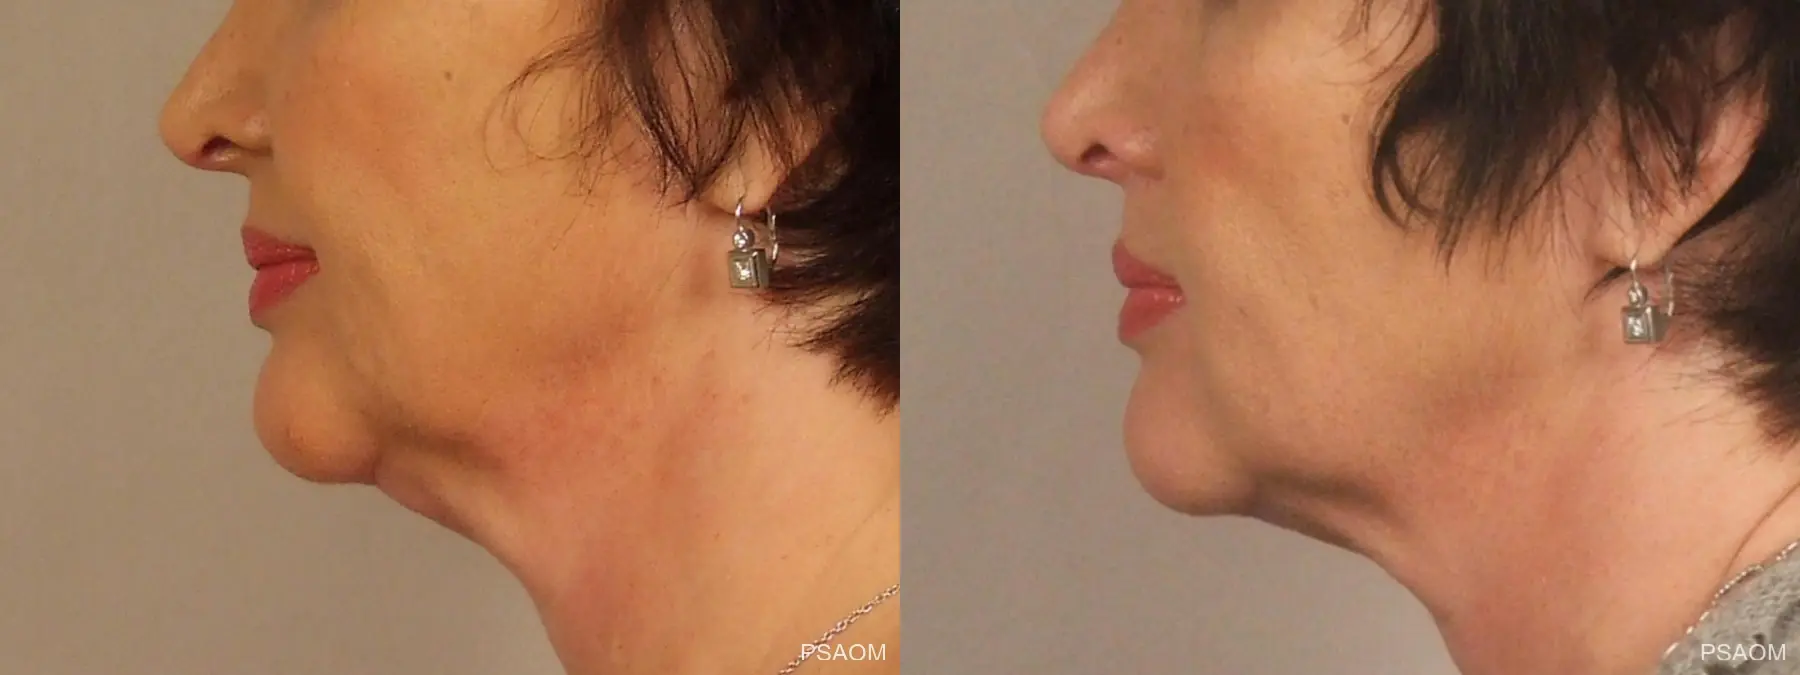 Injectables - Face: Patient 1 - Before and After 2